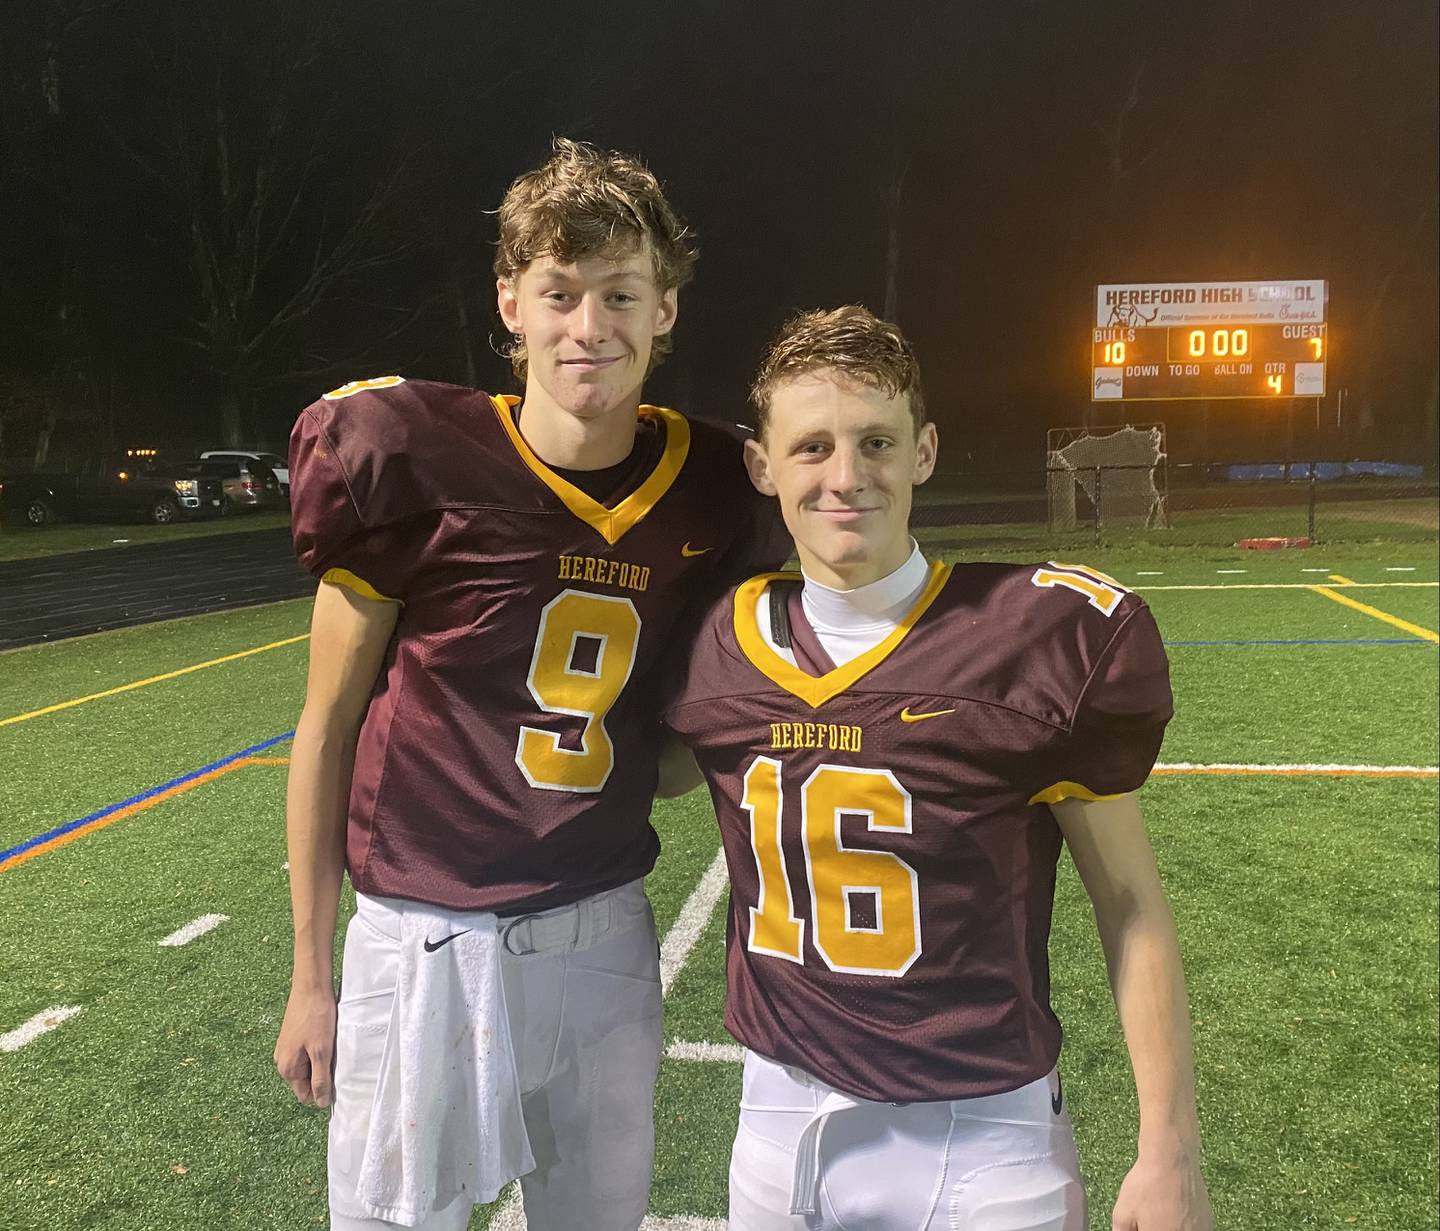 Grayson Ayers direct an efficient Hereford offense and Grady Moran kicked a 29-yard field goal and caught a touchdown off the halfback option play as the 15th-ranked Bulls defeated New Town, 10-7, in a Class 2A North Region second round contest in rainy Baltimore County Friday evening.